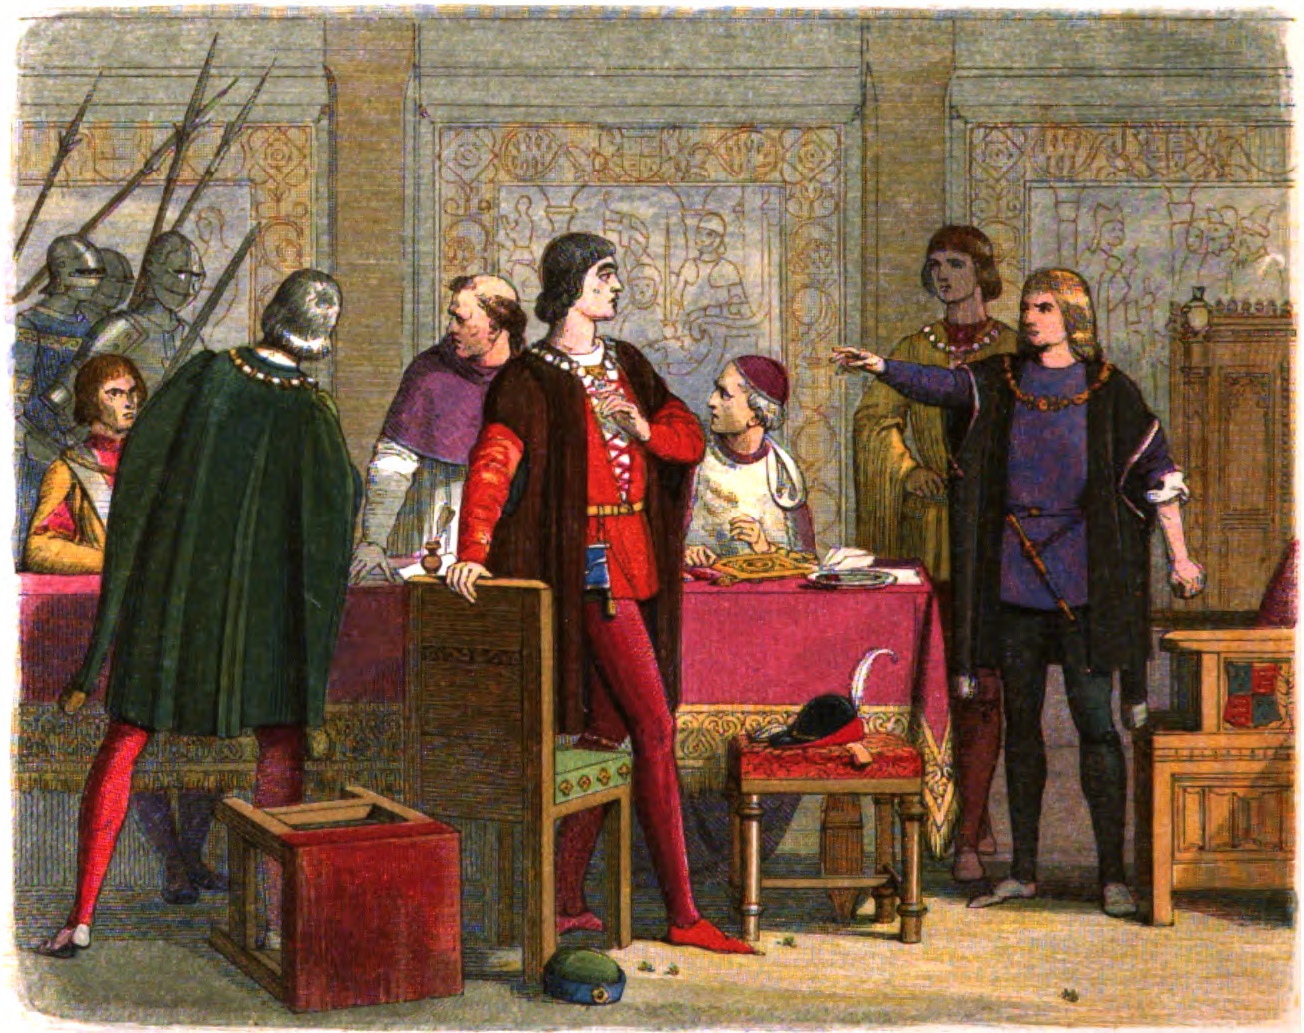 Richard, acting as Lord Protector, orders the arrest of William Hastings, 1st Baron Hastings. From 'A Chronicle of England: B.C. 55 – A.D. 1485', c. 1864. Wiki Commons.